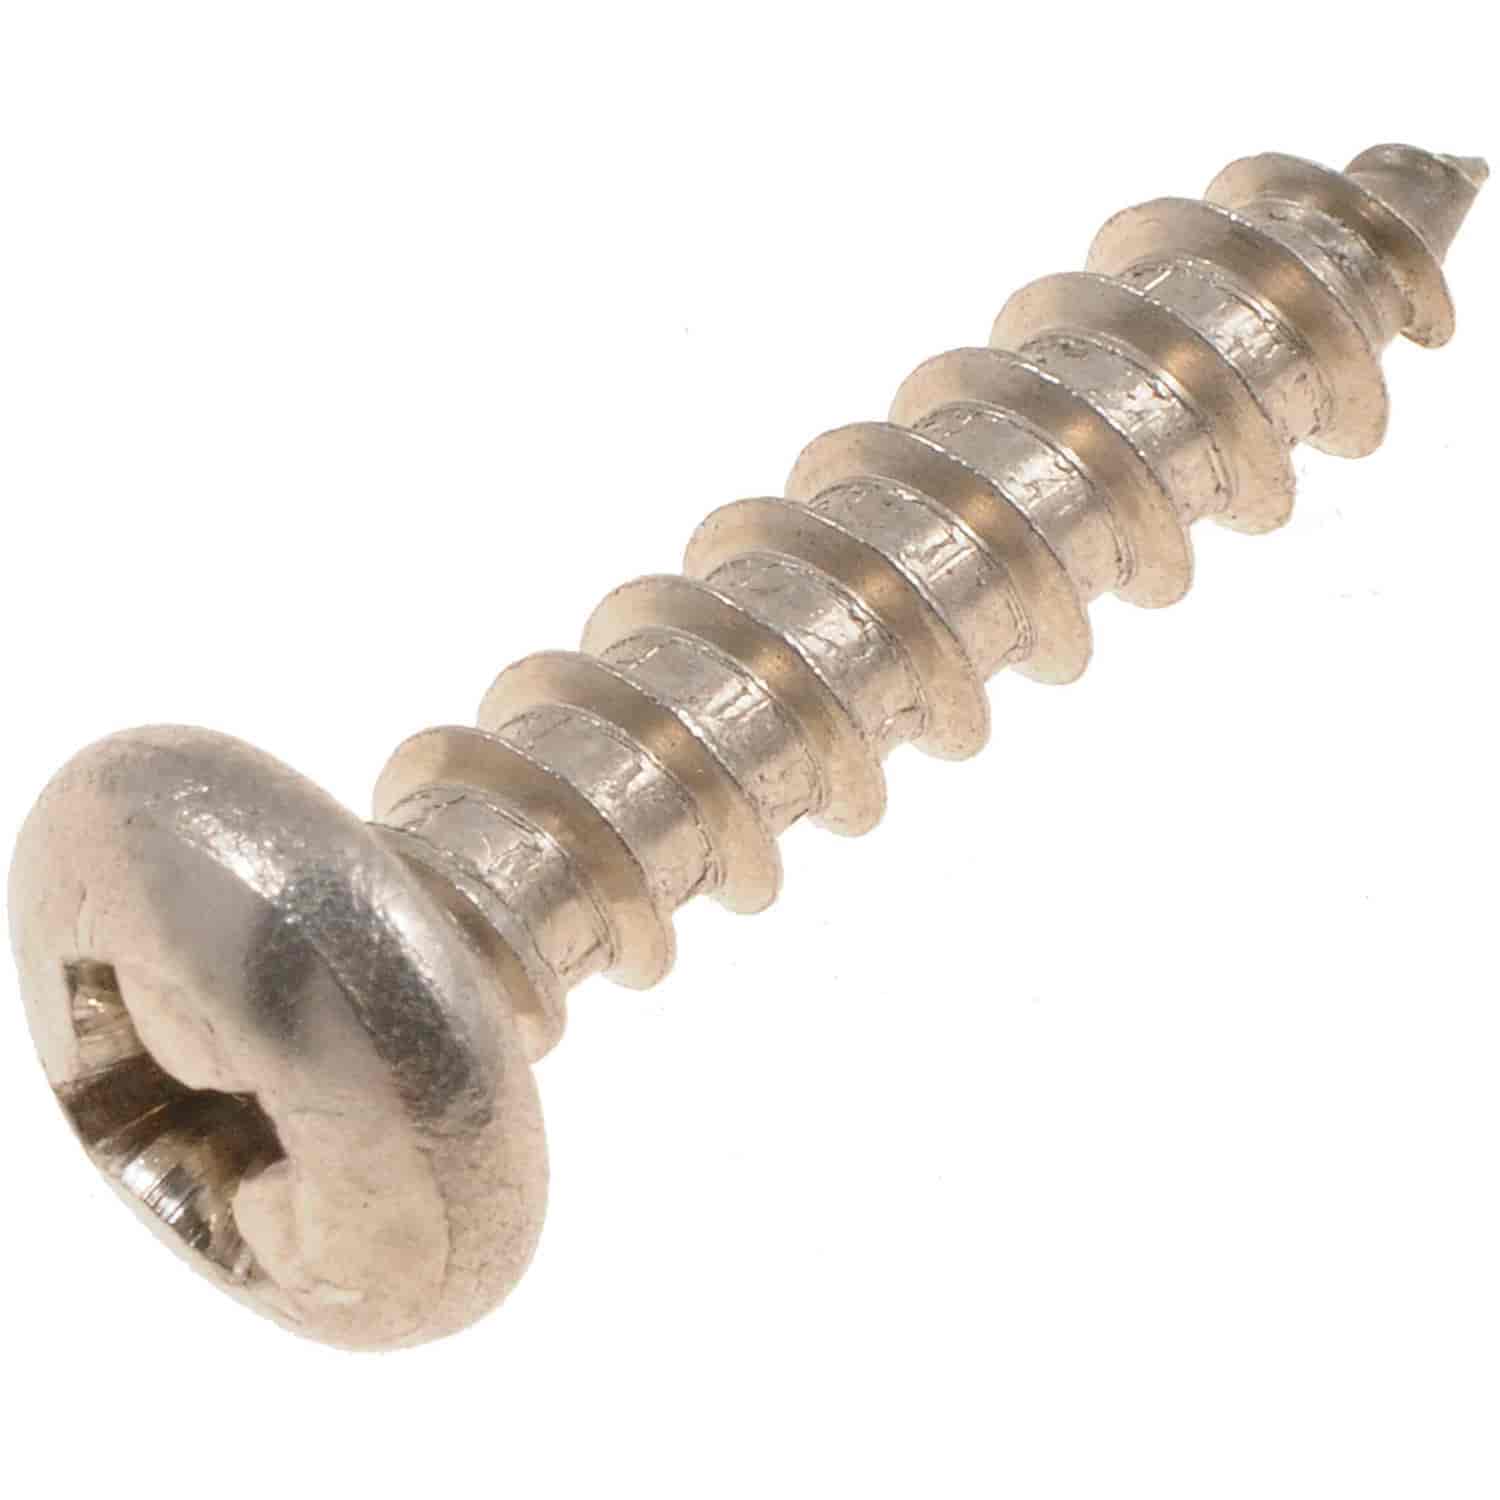 Screw-Stainless Steel-Phillips Pan Head-No. 8 x 3/4 In